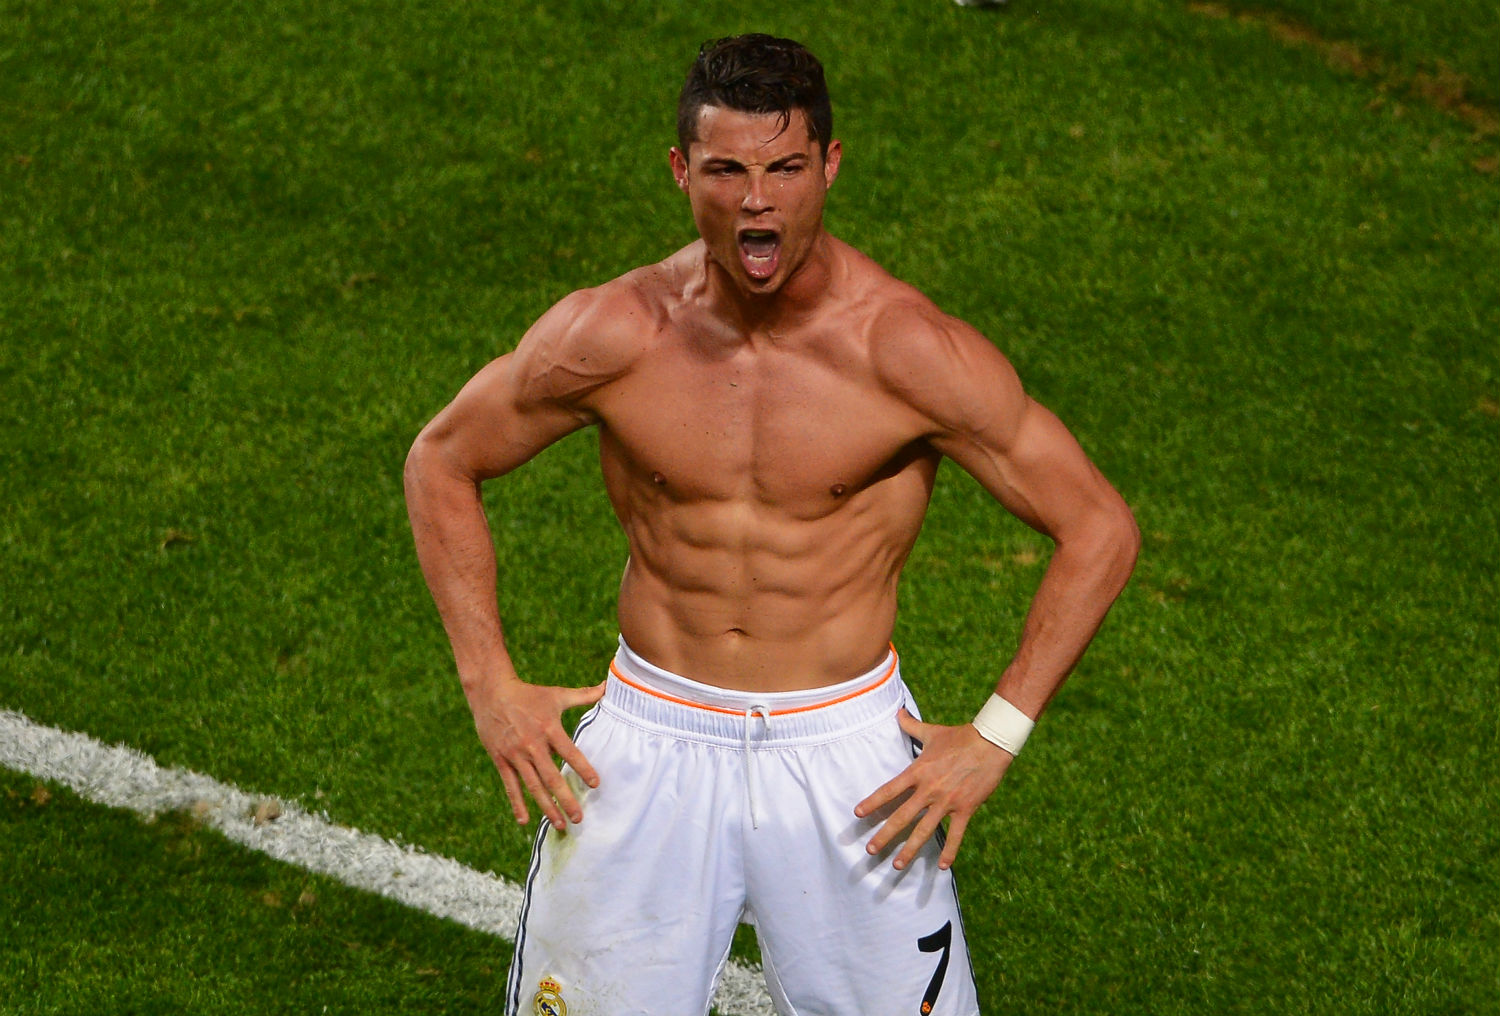 Cristiano Ronaldo refuses to comment on sexuality claims made in